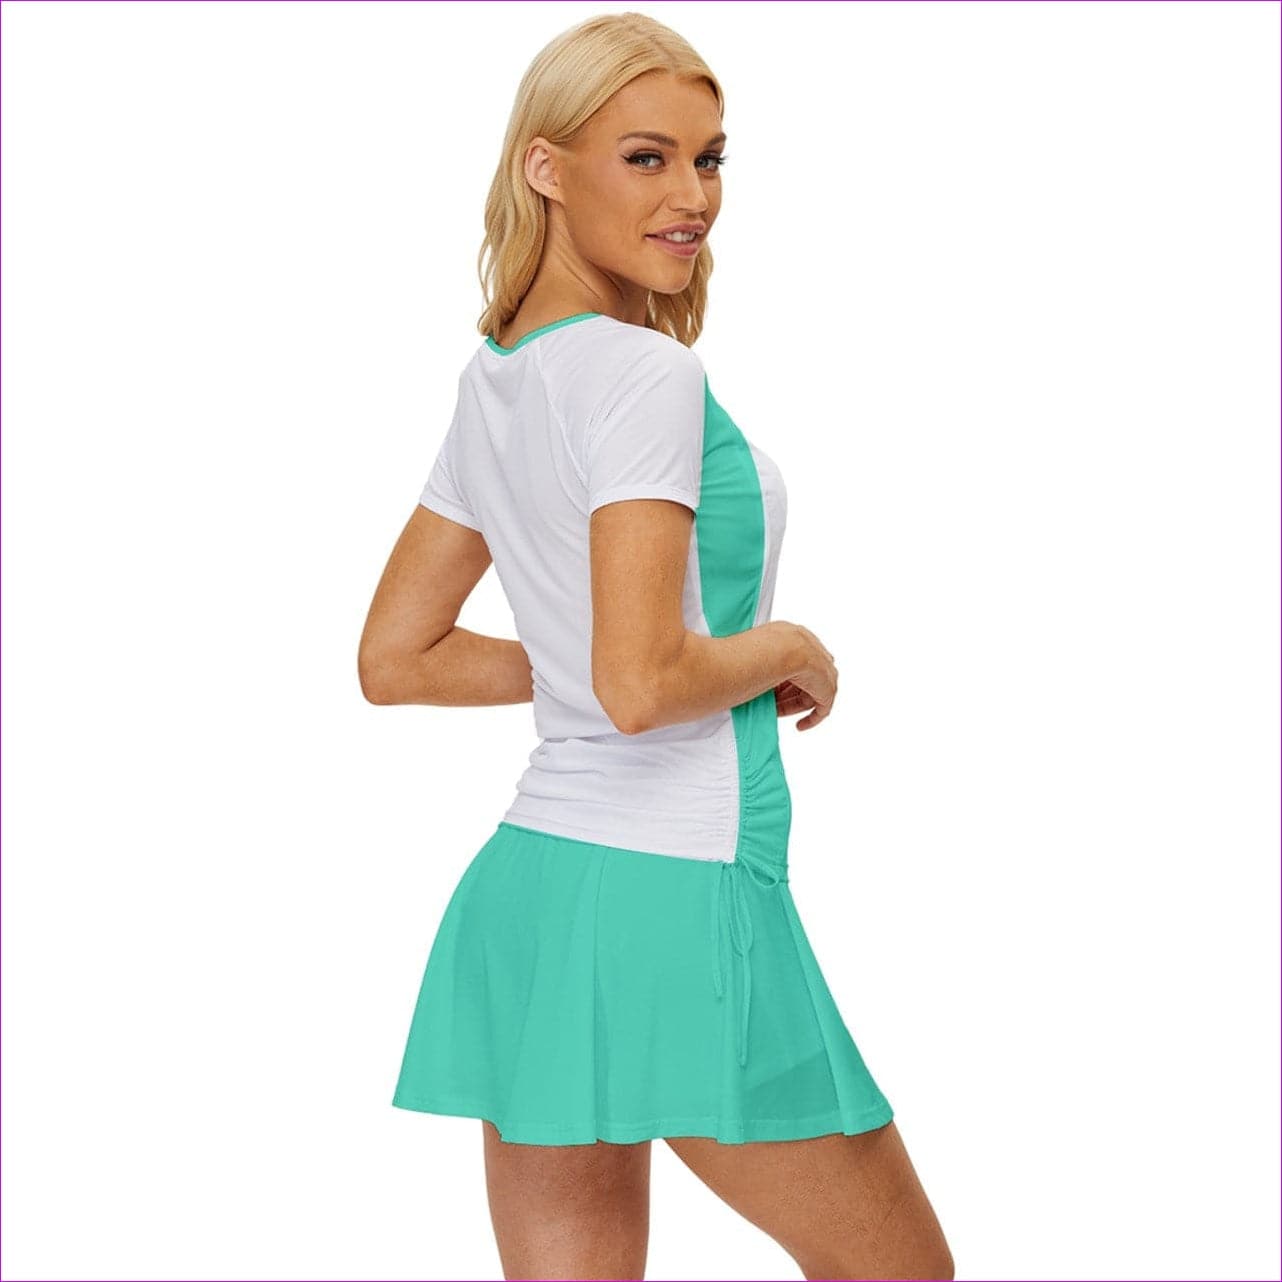 Deity Color Block Womens Sports Wear Set - athletic-workout-sets at TFC&H Co.